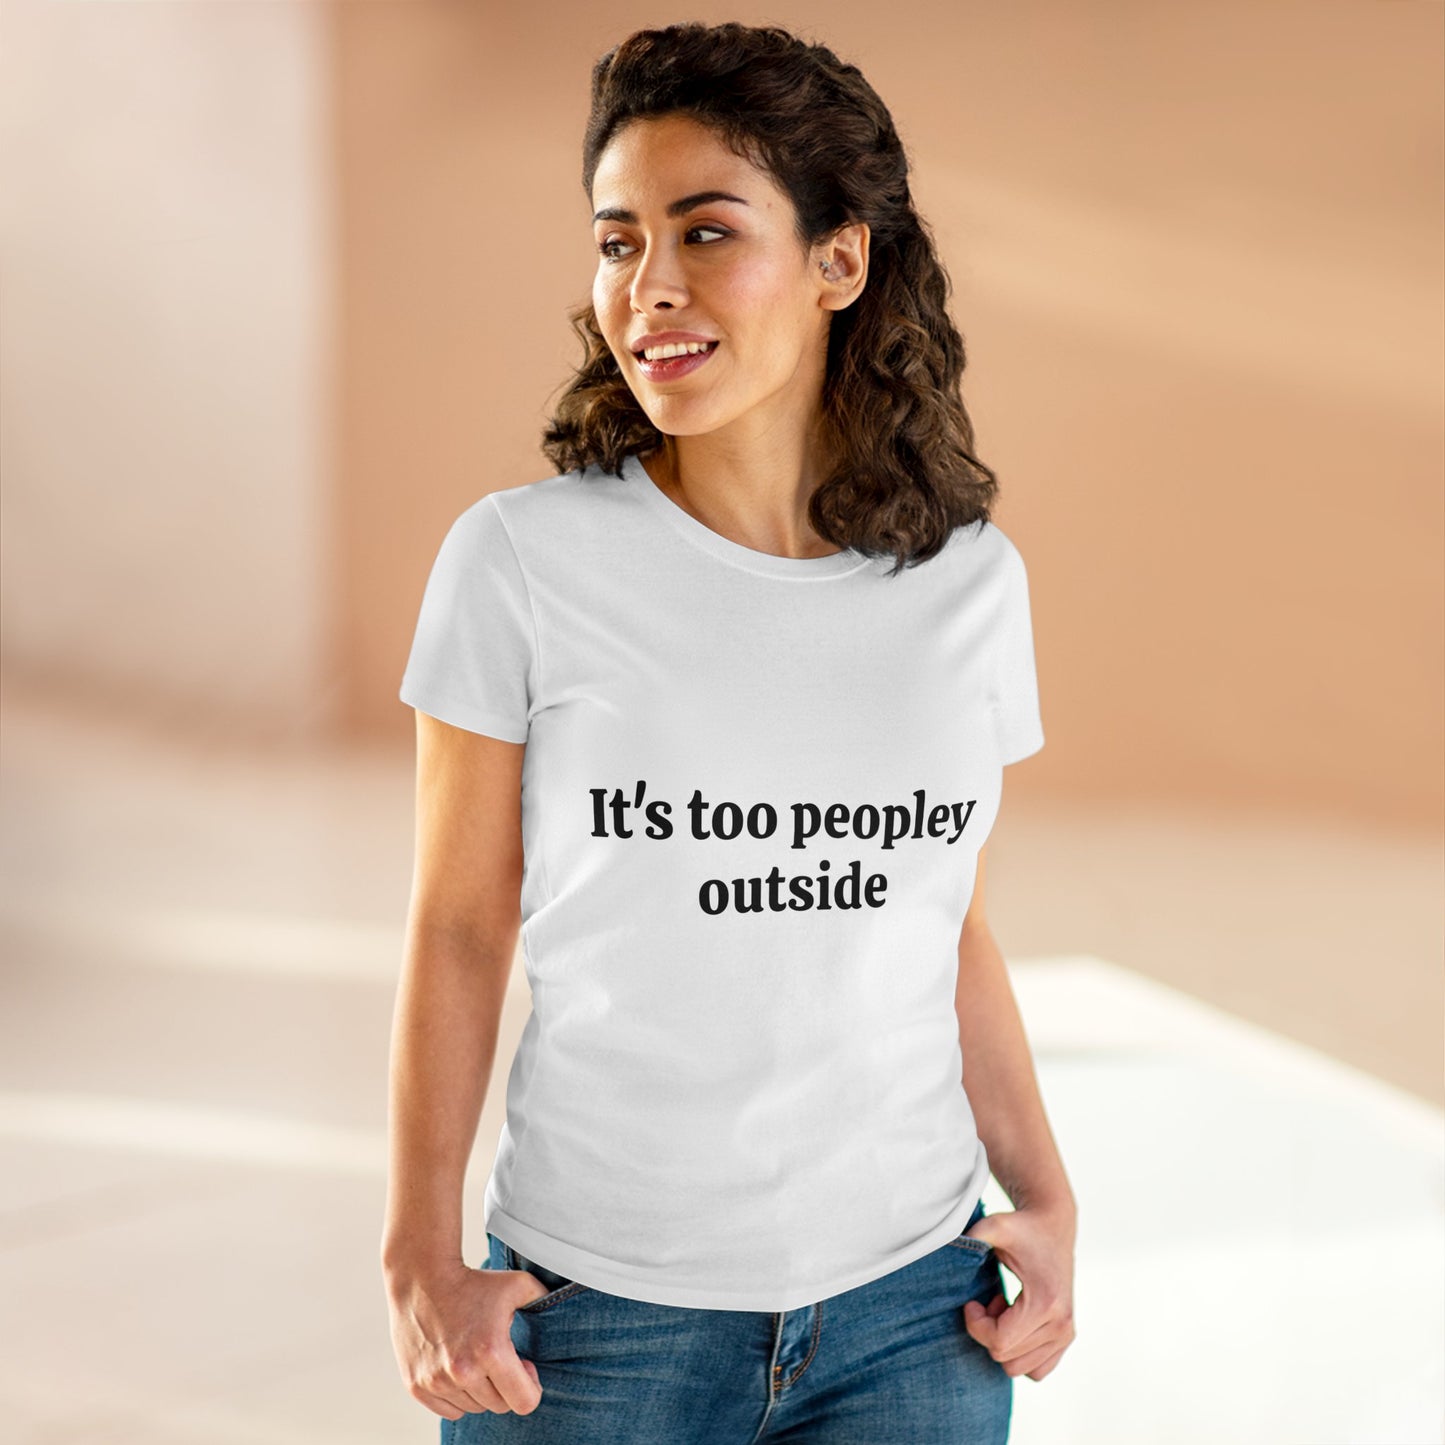 It's too peopley outside Cotton Tee